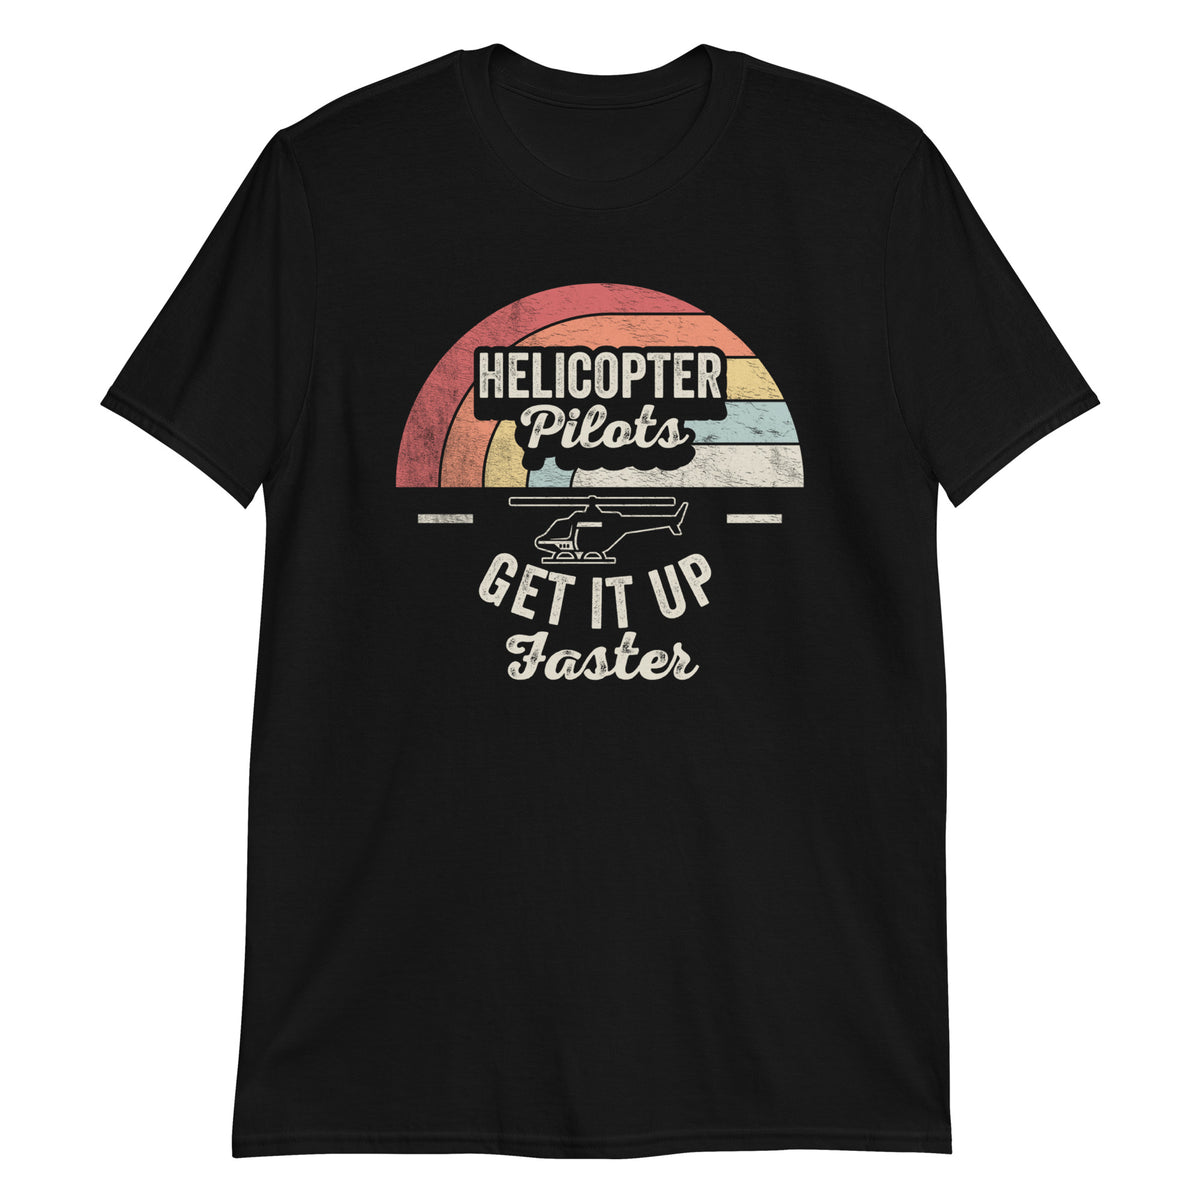 Helicopter Pilots Get up Faster T-Shirt